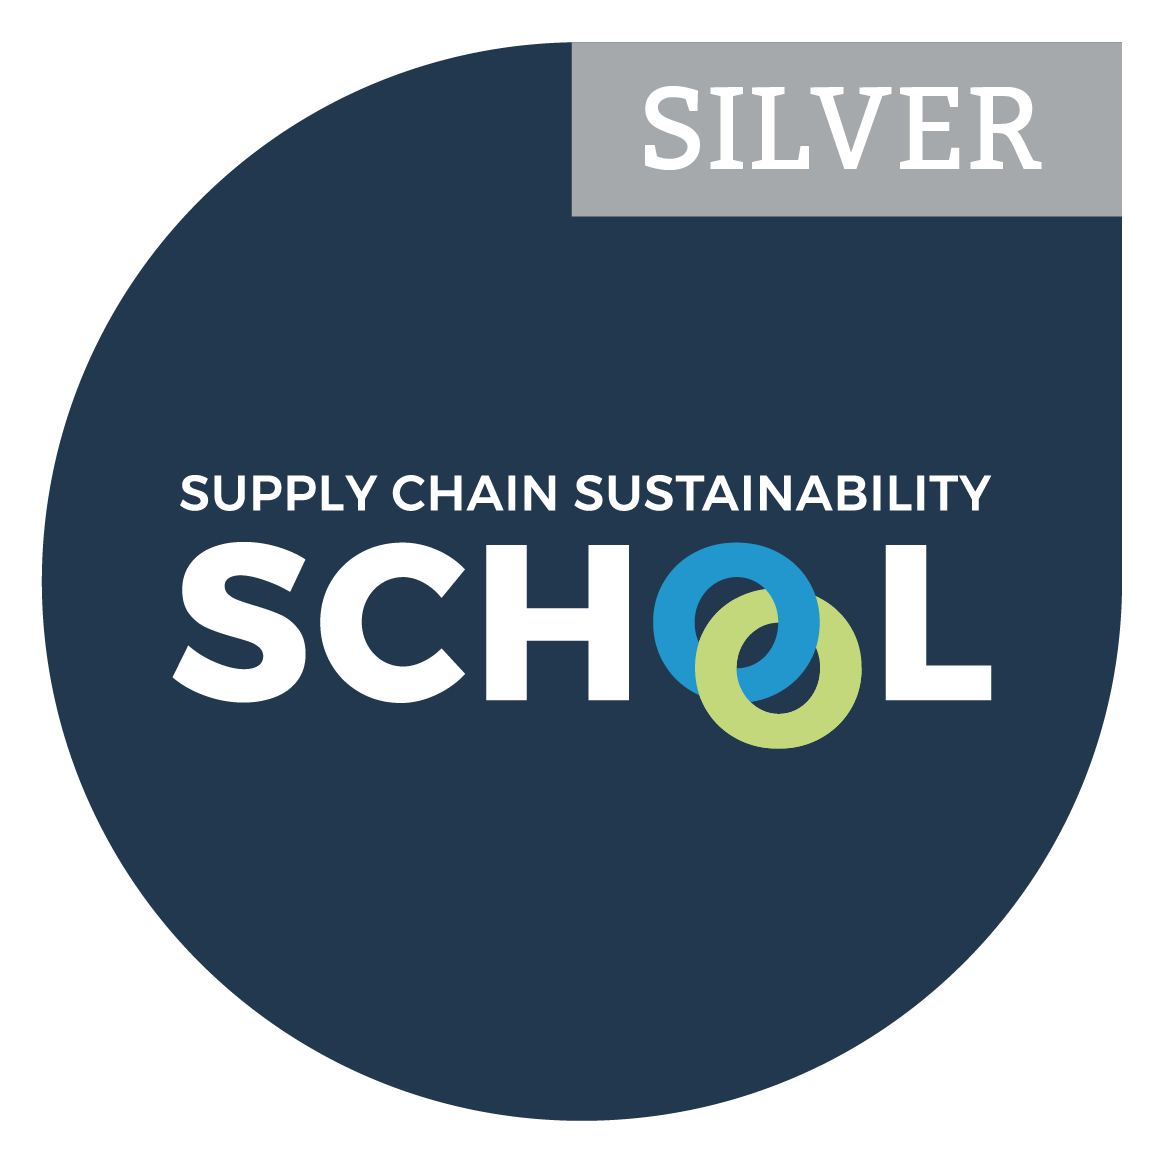 Supply Chain Sustainability SCHOL Silver